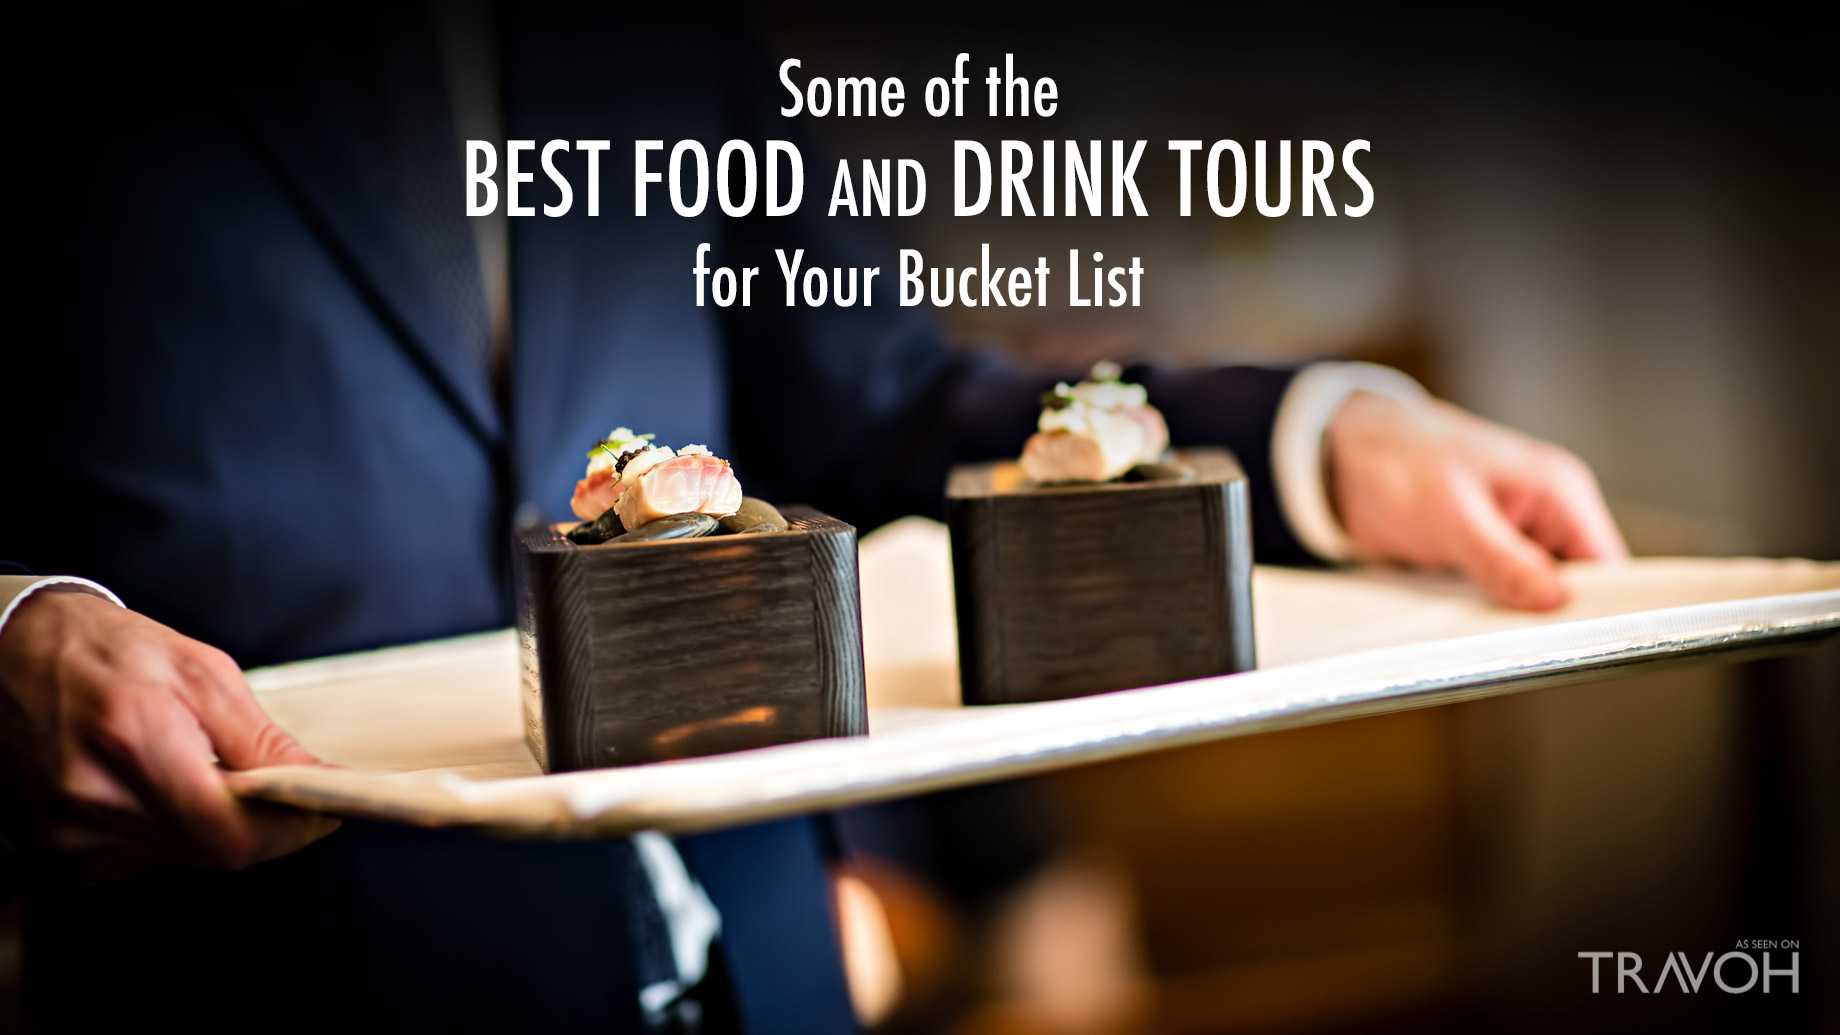 Some of the Best Food and Drink Tours for Your Bucket List